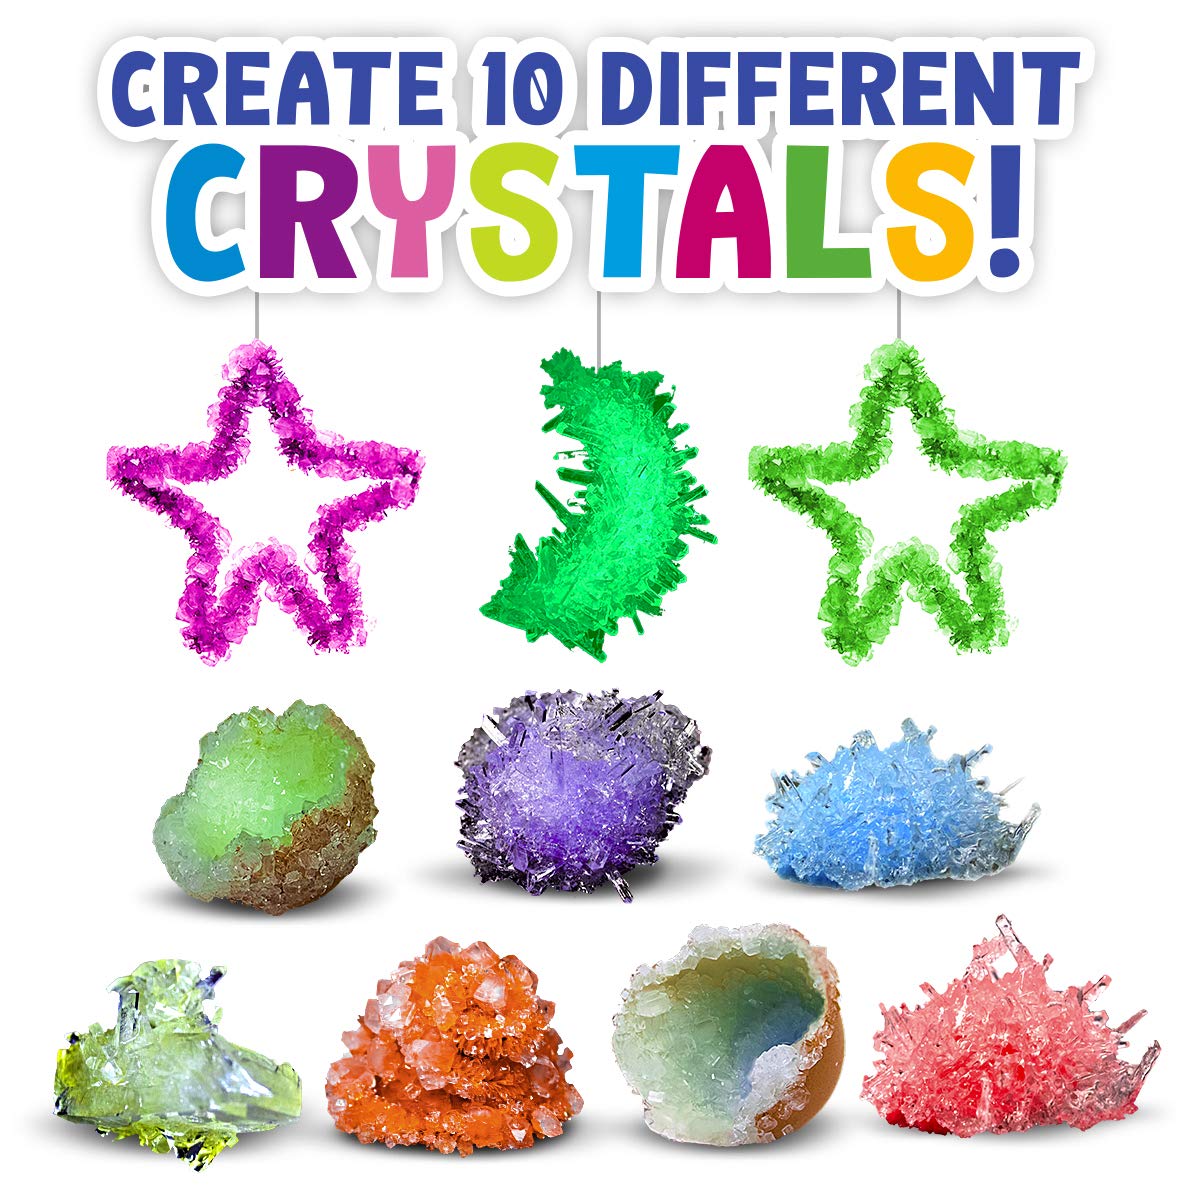 Crystal Growing kit for Kids. Science Experiment Kit - 10 Crystals! Great Crafts Gift for Girls and Boys Ages 6,7,8,9,10